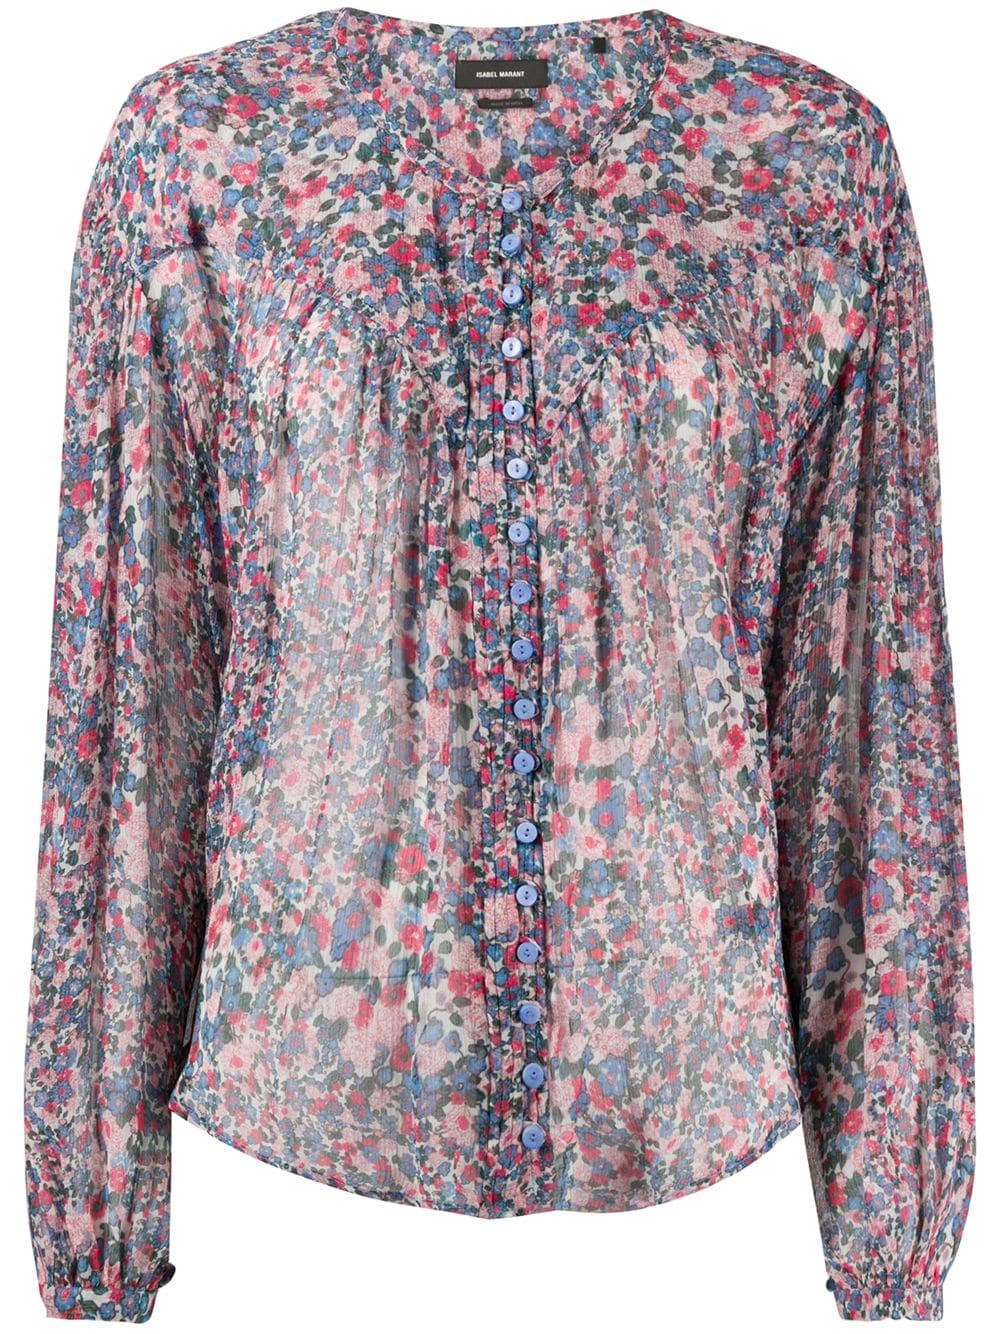 isabel marant ORIONEA SHIRT available on montiboutique.com - 33798